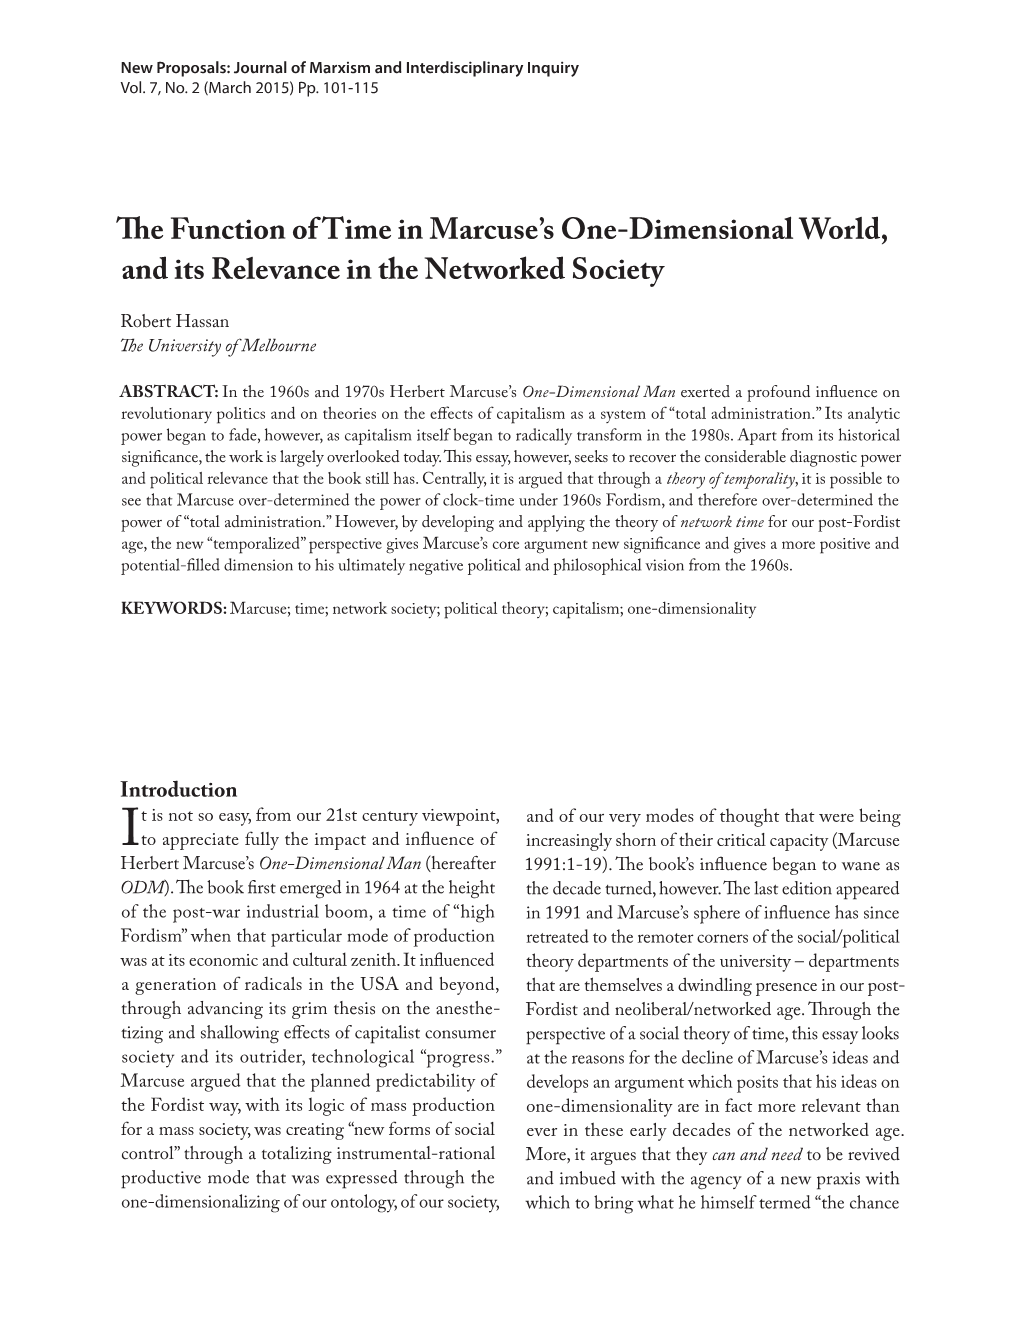 The Function of Time in Marcuse's One-Dimensional World, and Its